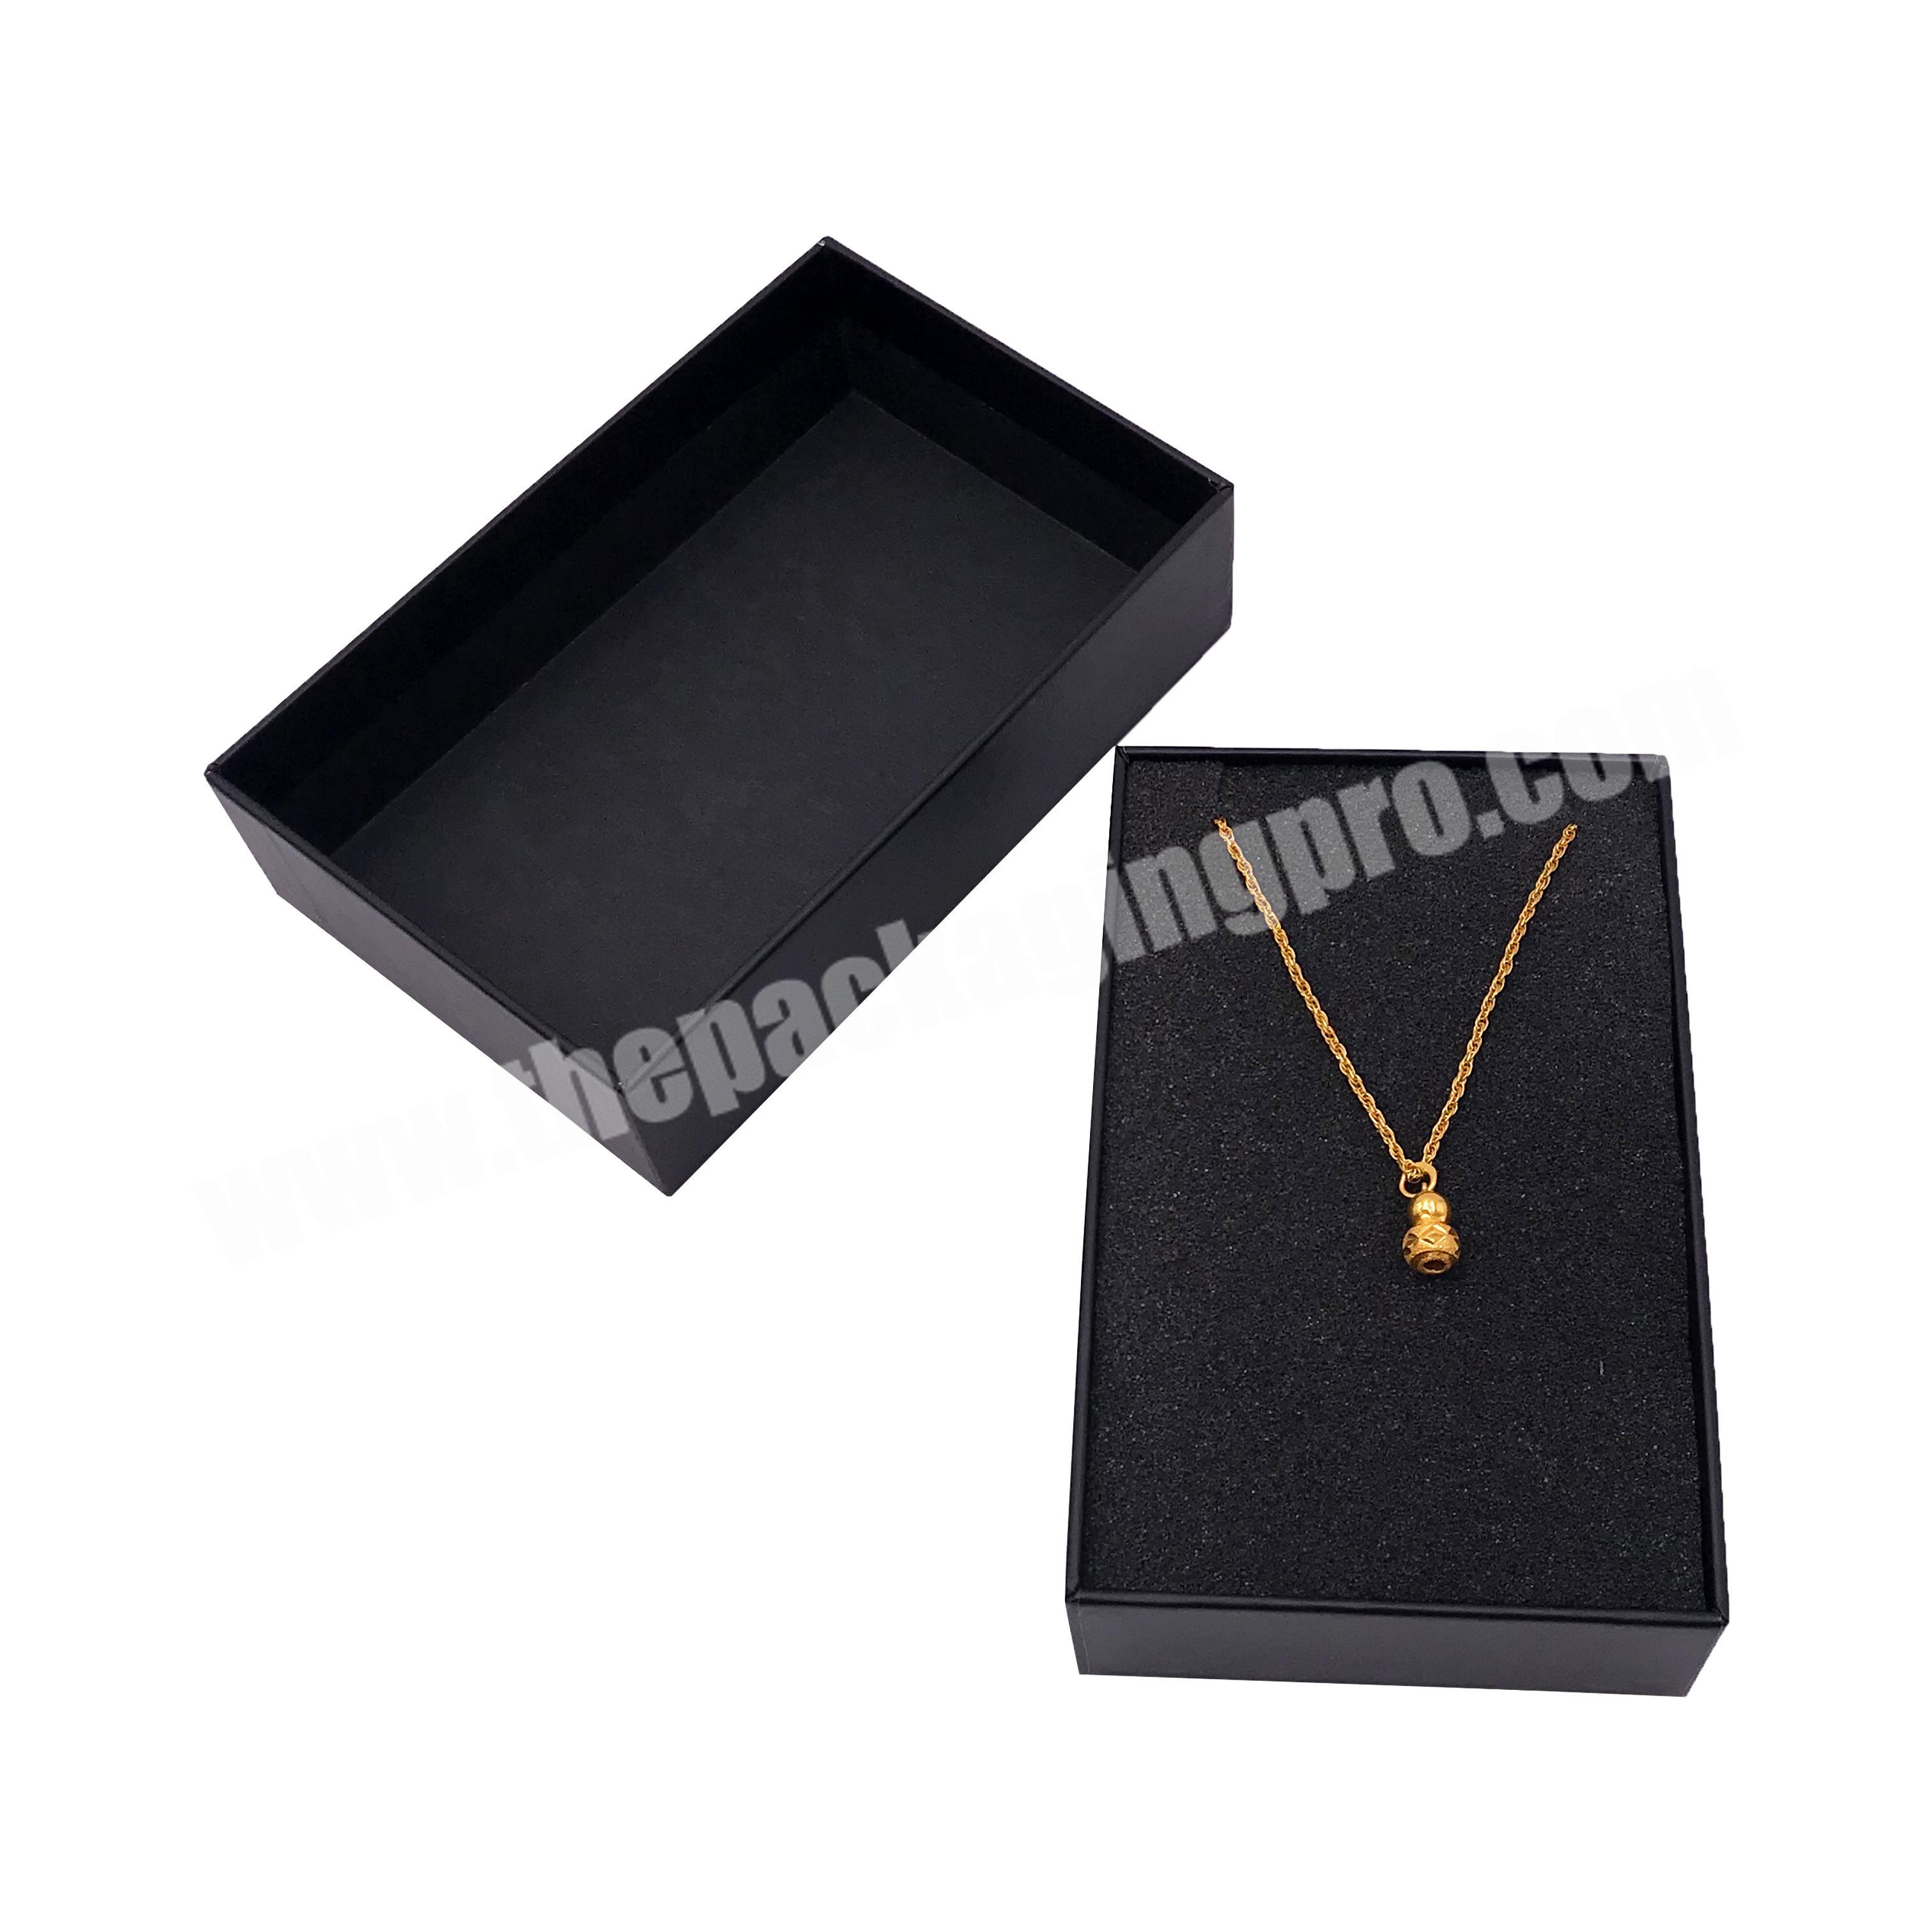 China new product custom jewelry gift box packaging set and saucer packaging boxes